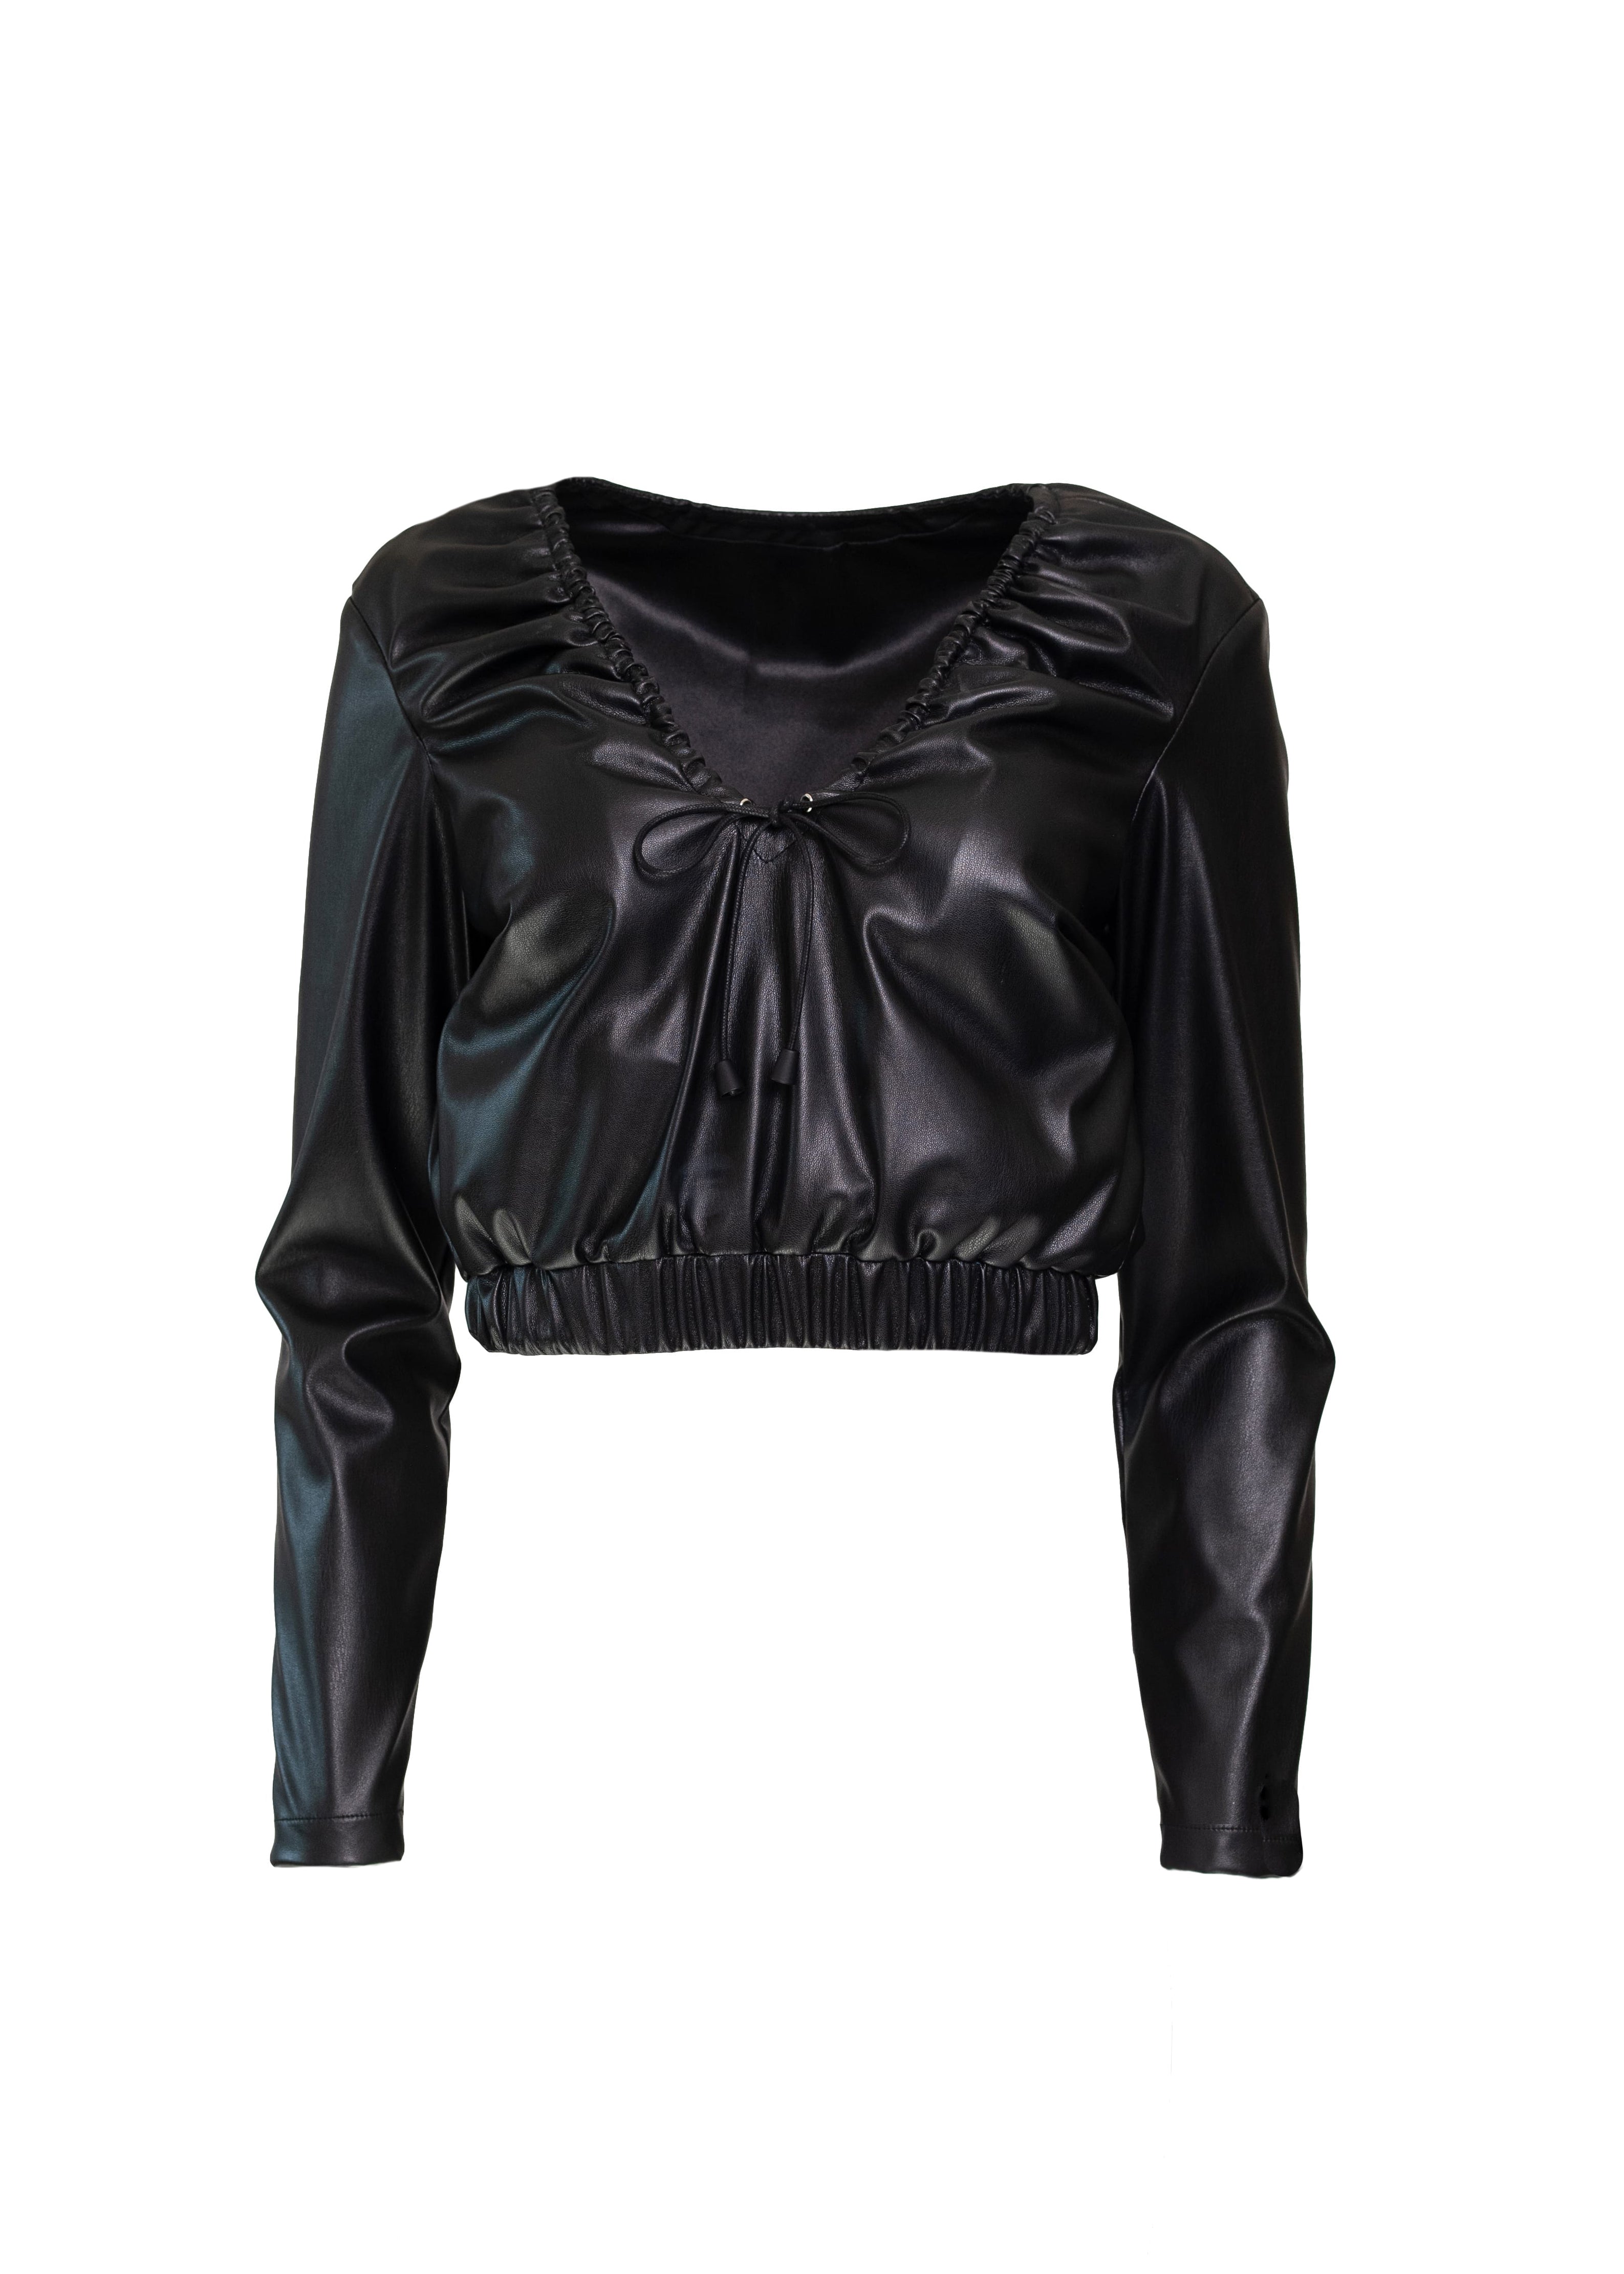 Ruched 'Leather' Crop Top